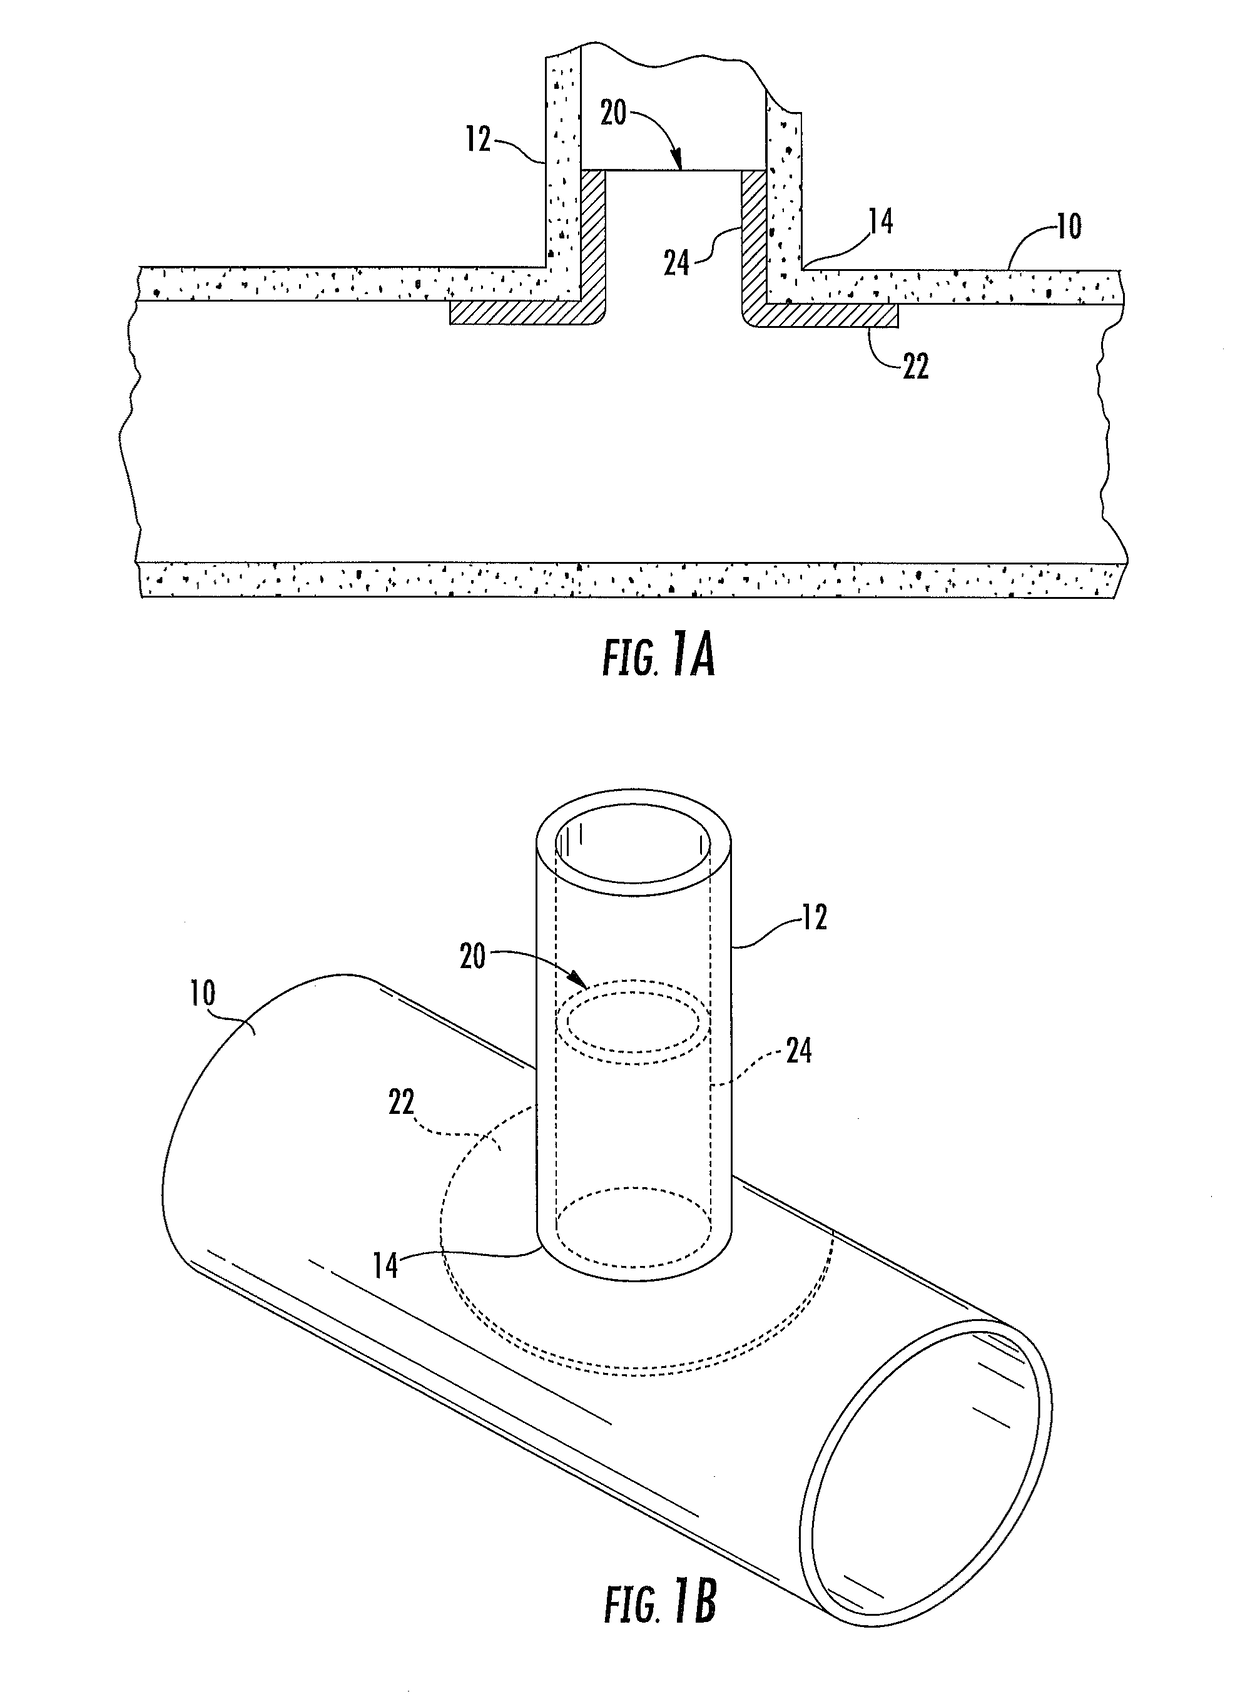 Method and Apparatus for Repairing a Pipe Junction